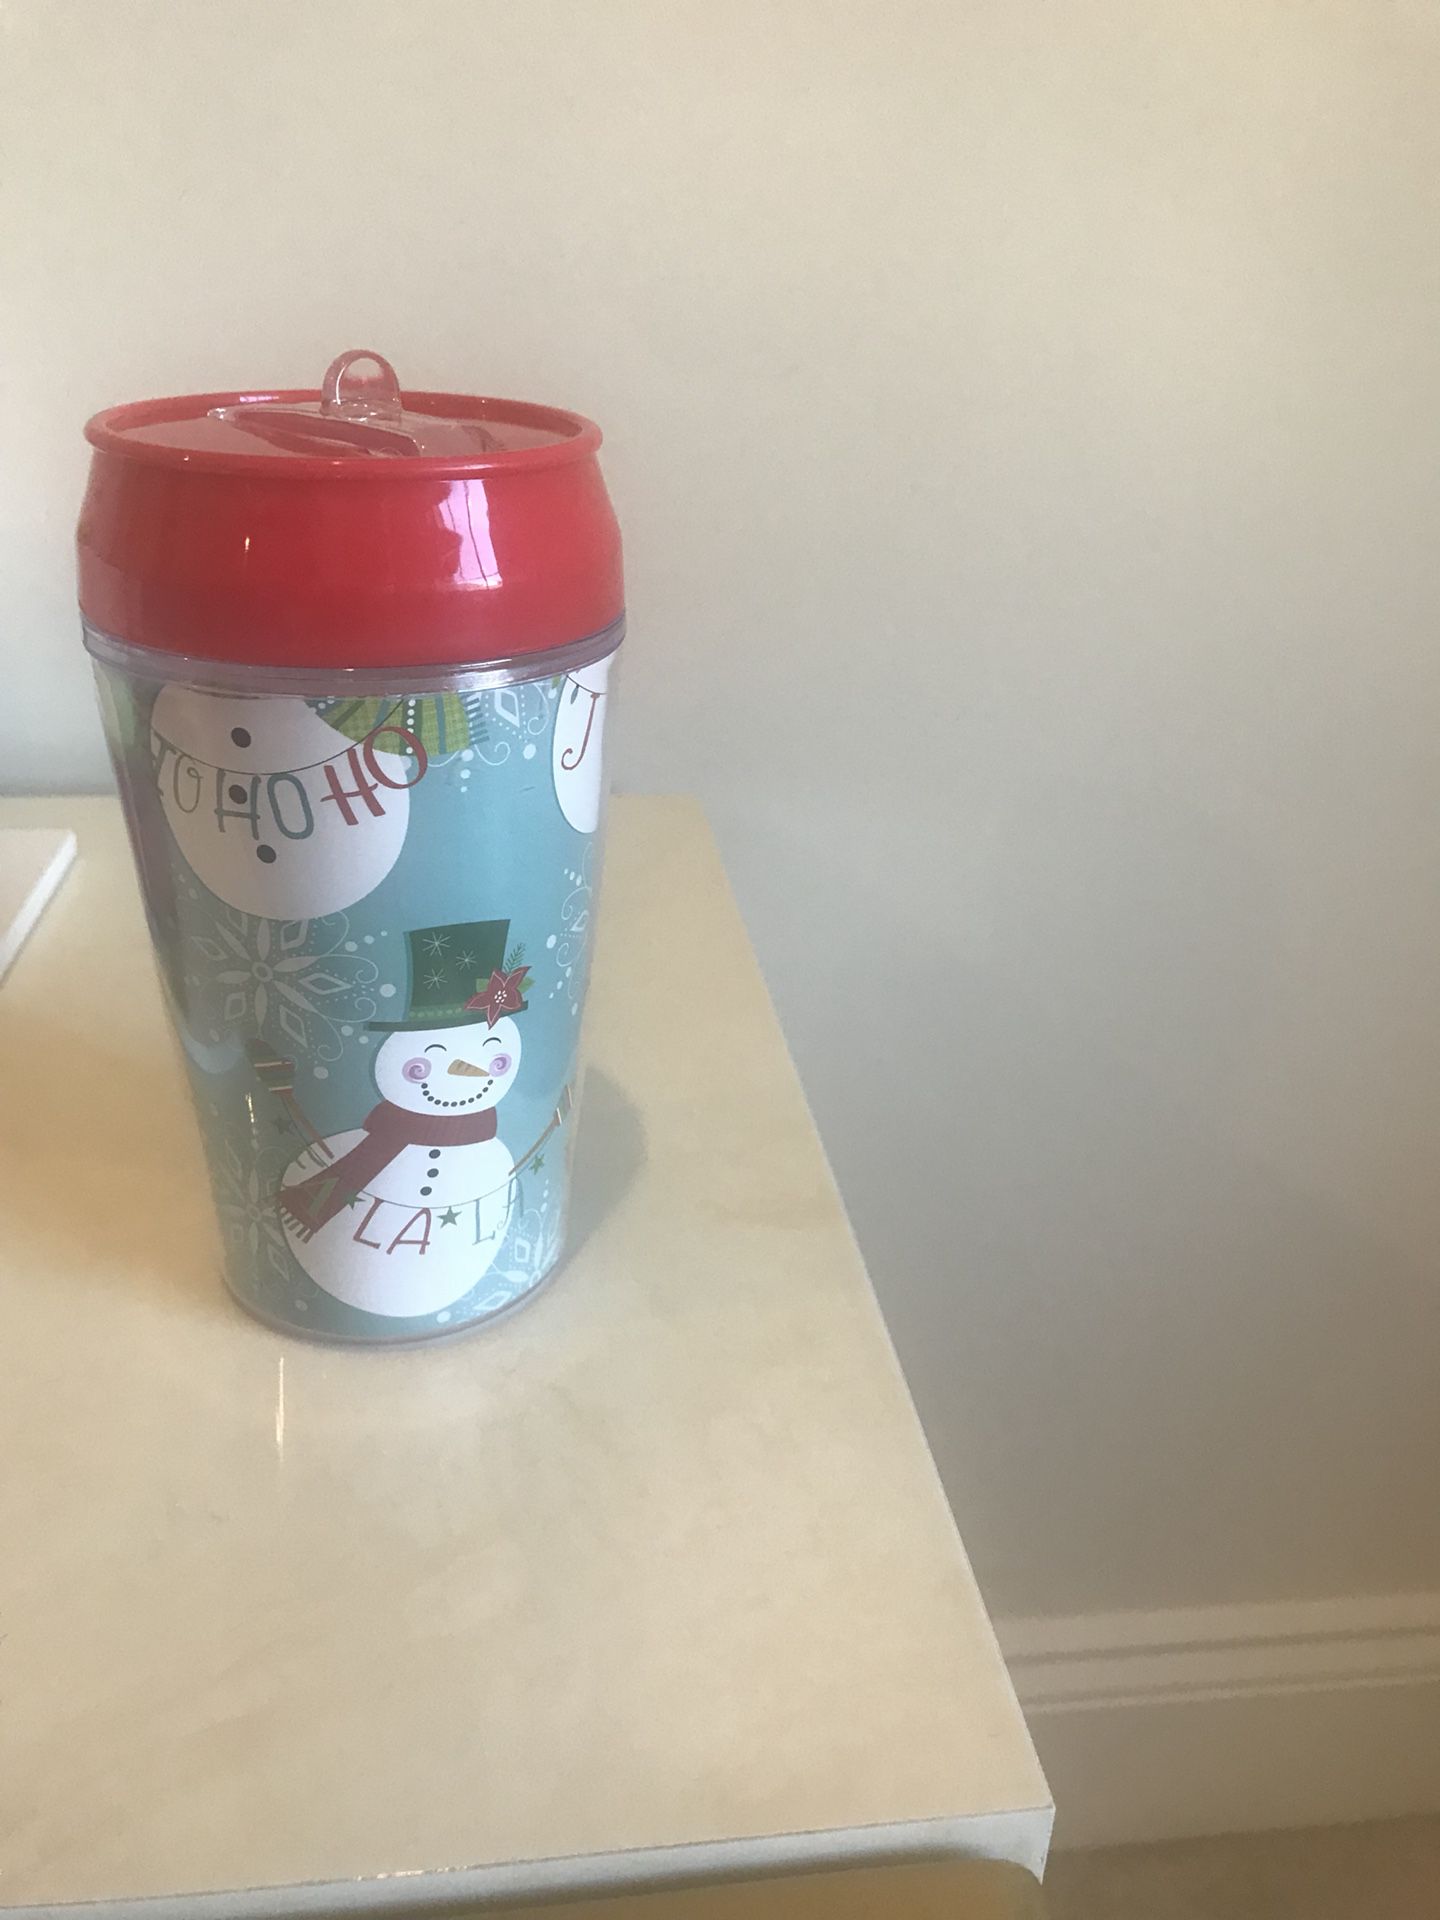 Snowman themed plastic tumbler with flip up straws